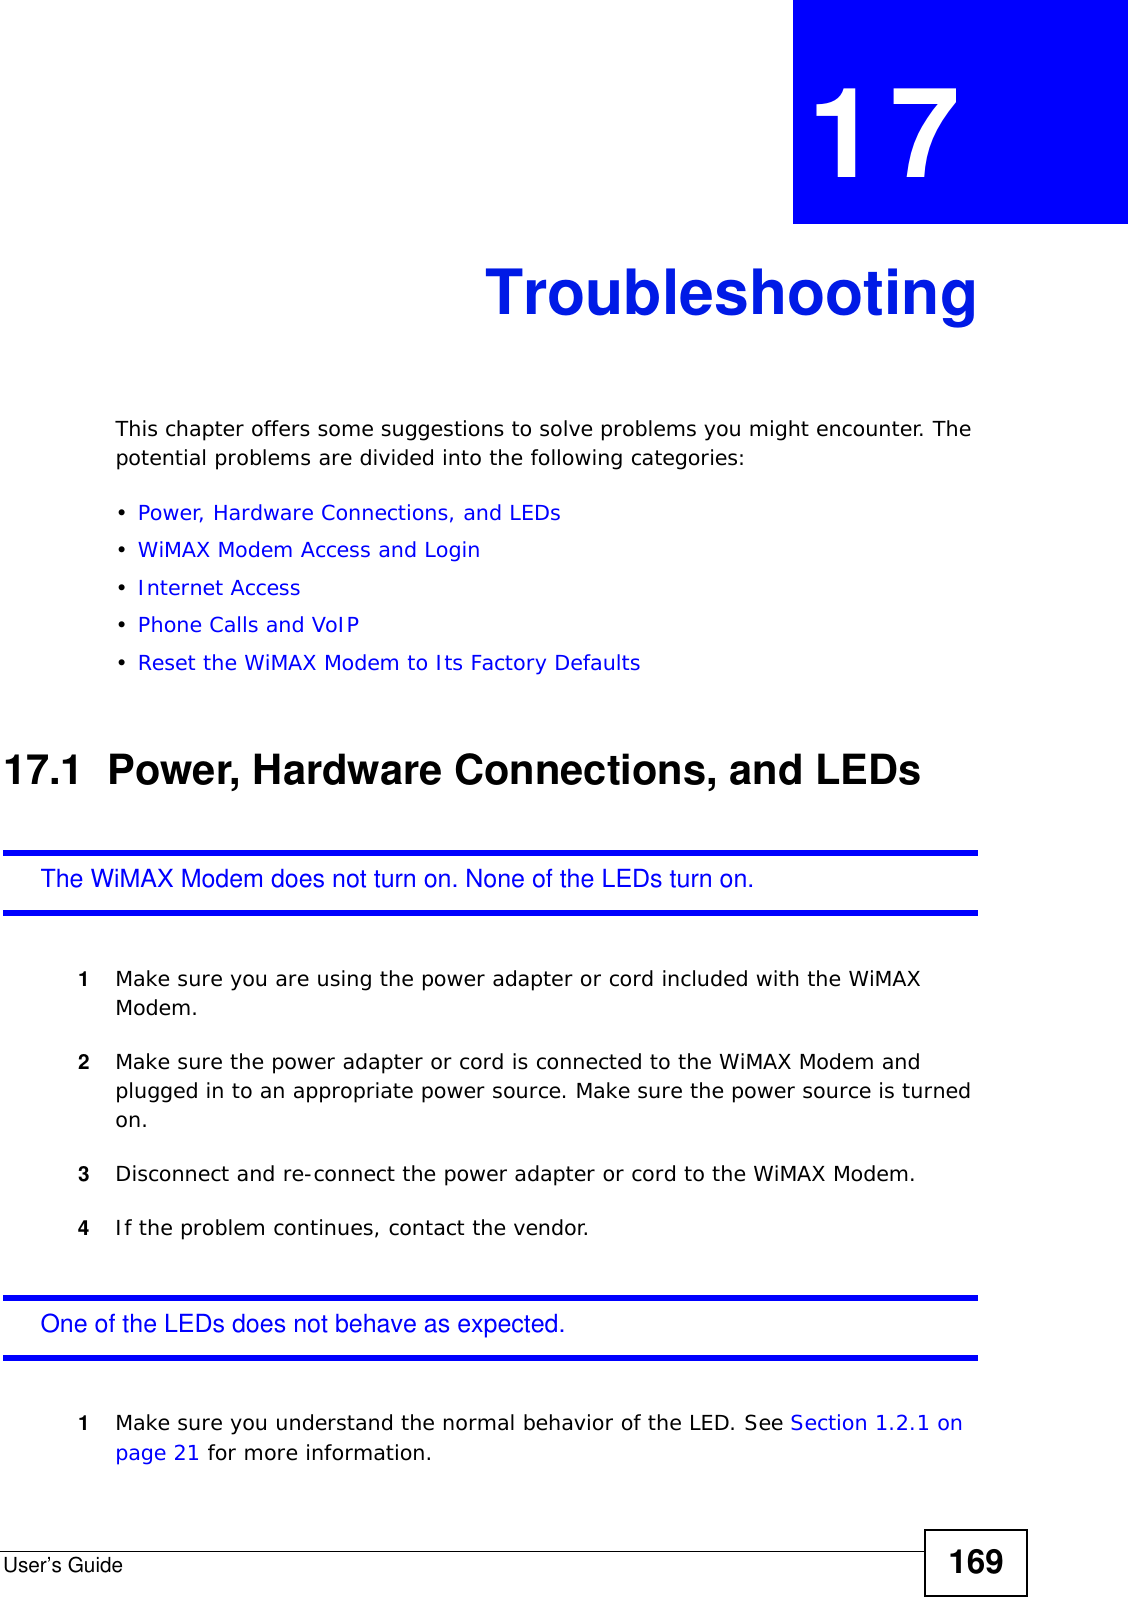 User’s Guide 169CHAPTER  17 TroubleshootingThis chapter offers some suggestions to solve problems you might encounter. The potential problems are divided into the following categories:•Power, Hardware Connections, and LEDs•WiMAX Modem Access and Login•Internet Access•Phone Calls and VoIP•Reset the WiMAX Modem to Its Factory Defaults17.1  Power, Hardware Connections, and LEDsThe WiMAX Modem does not turn on. None of the LEDs turn on.1Make sure you are using the power adapter or cord included with the WiMAX Modem.2Make sure the power adapter or cord is connected to the WiMAX Modem and plugged in to an appropriate power source. Make sure the power source is turned on.3Disconnect and re-connect the power adapter or cord to the WiMAX Modem.4If the problem continues, contact the vendor.One of the LEDs does not behave as expected.1Make sure you understand the normal behavior of the LED. See Section 1.2.1 on page 21 for more information.